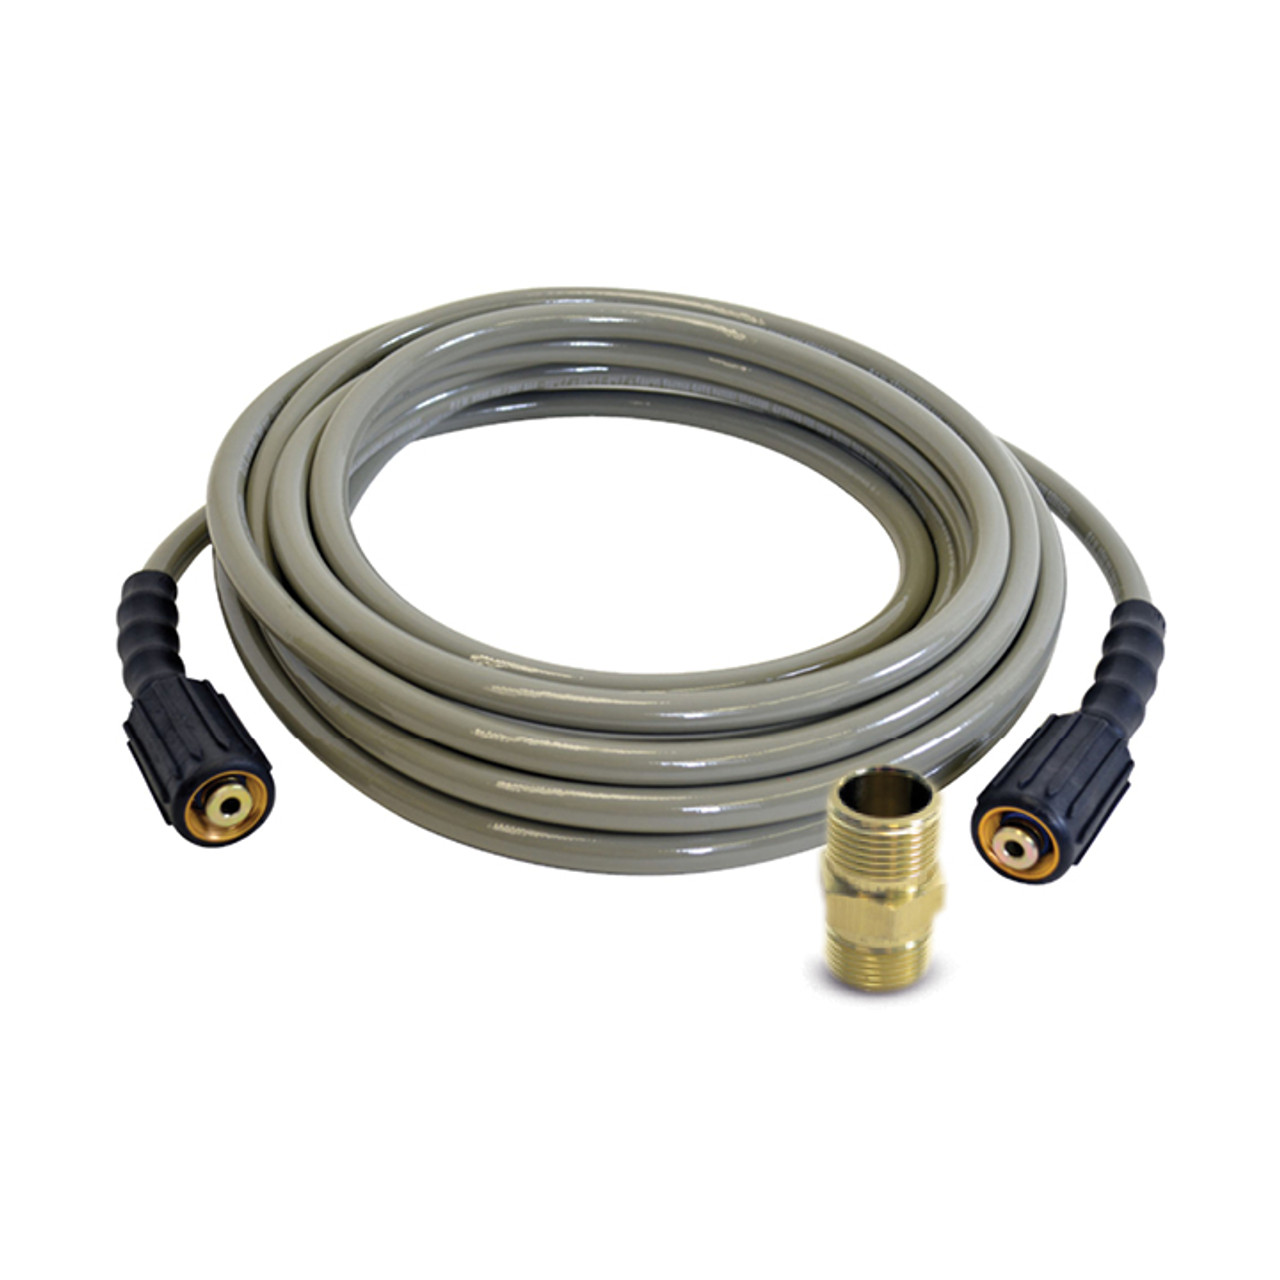 1/4 in. x 25 ft. x 3300 PSI Cold Water Replacement/Extension Hose